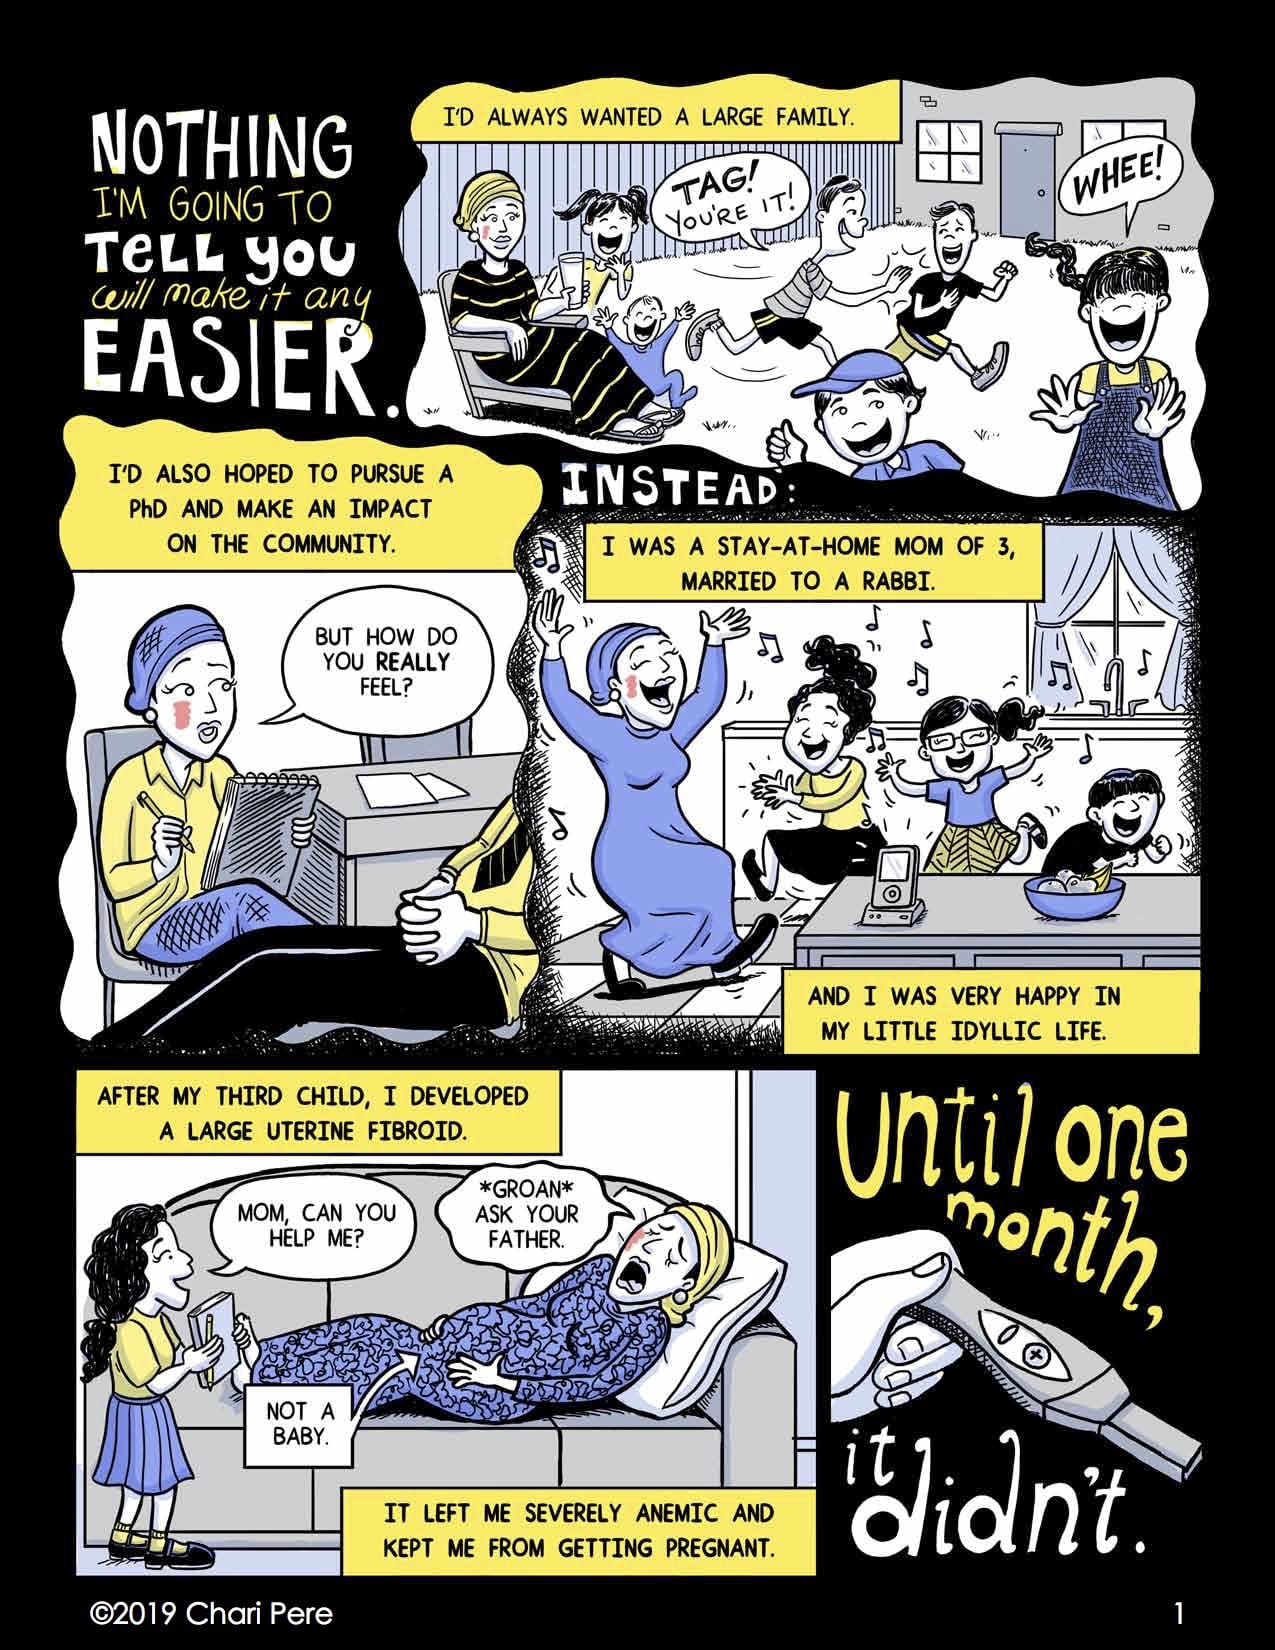 World Down Syndrome Day comic